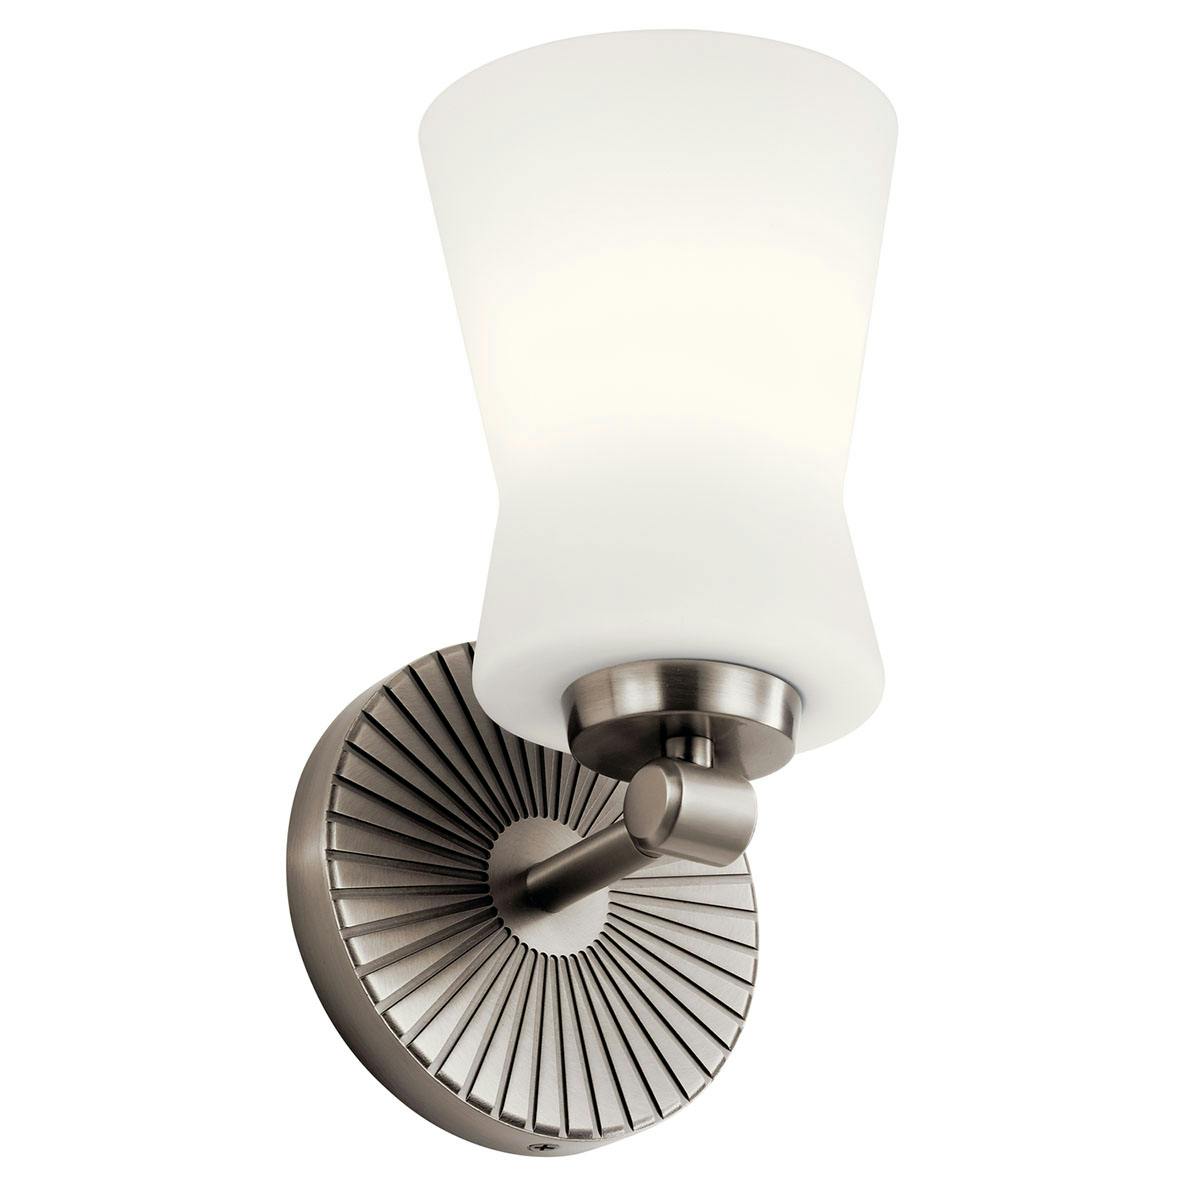 Brianne 1 Light Sconce Classic Pewter on a white background